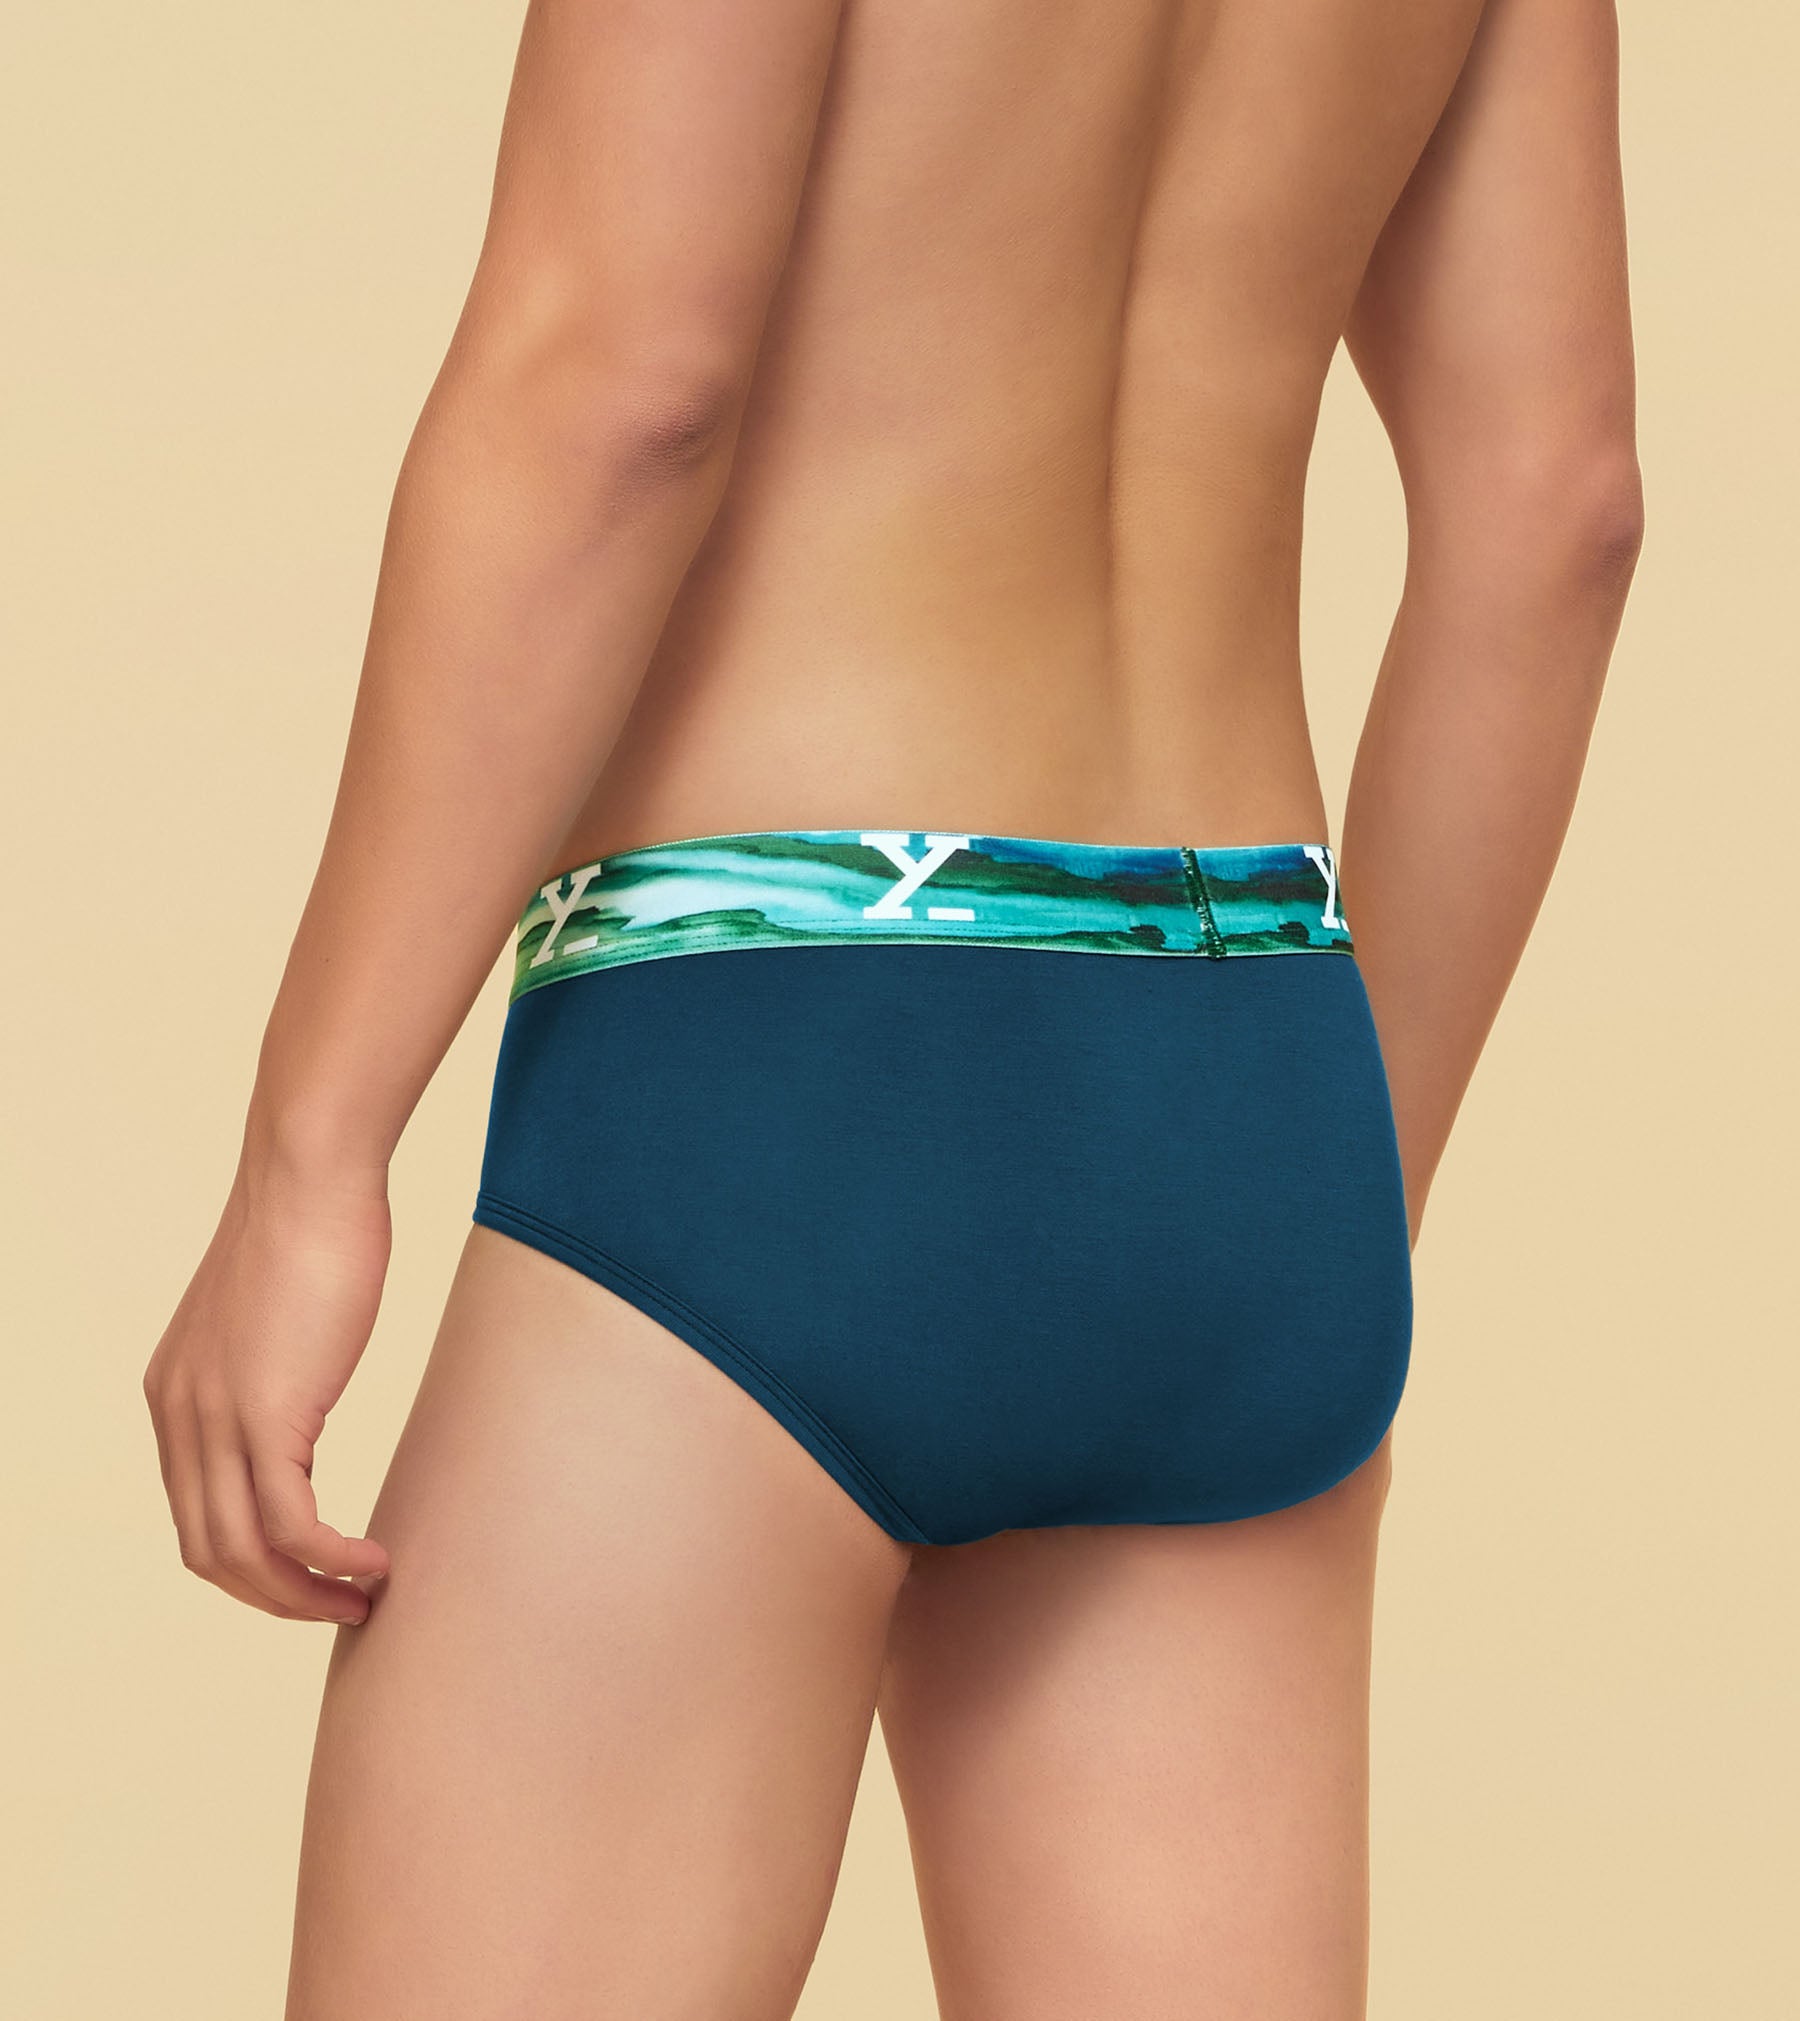 Dynamo Modal Briefs For Men Pack of 3 (Green, Grey, White) -  XYXX Mens Apparels